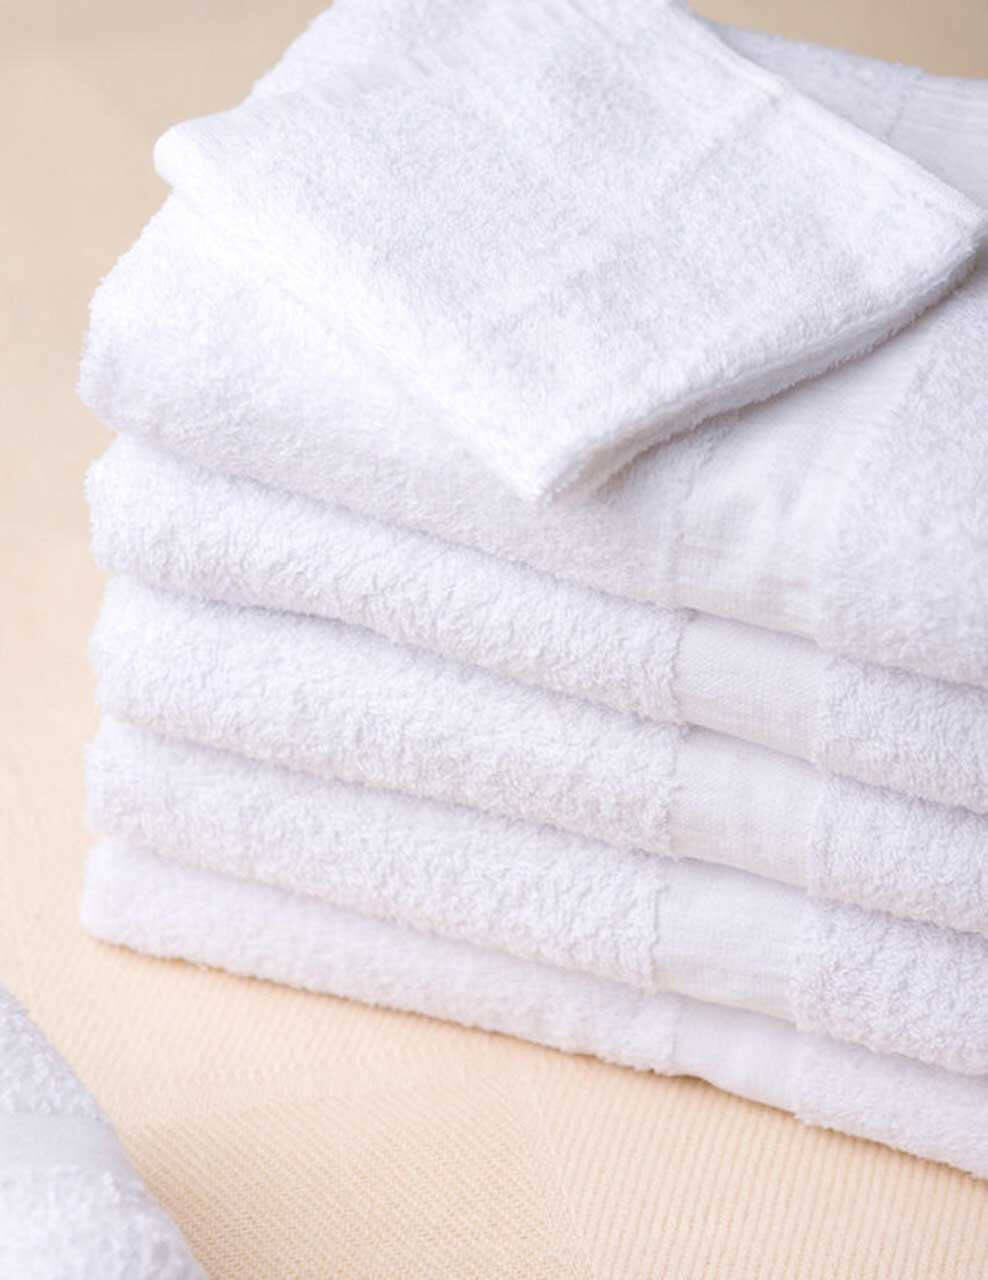 Simple And Easy Reasons For Using Antimicrobial Towels